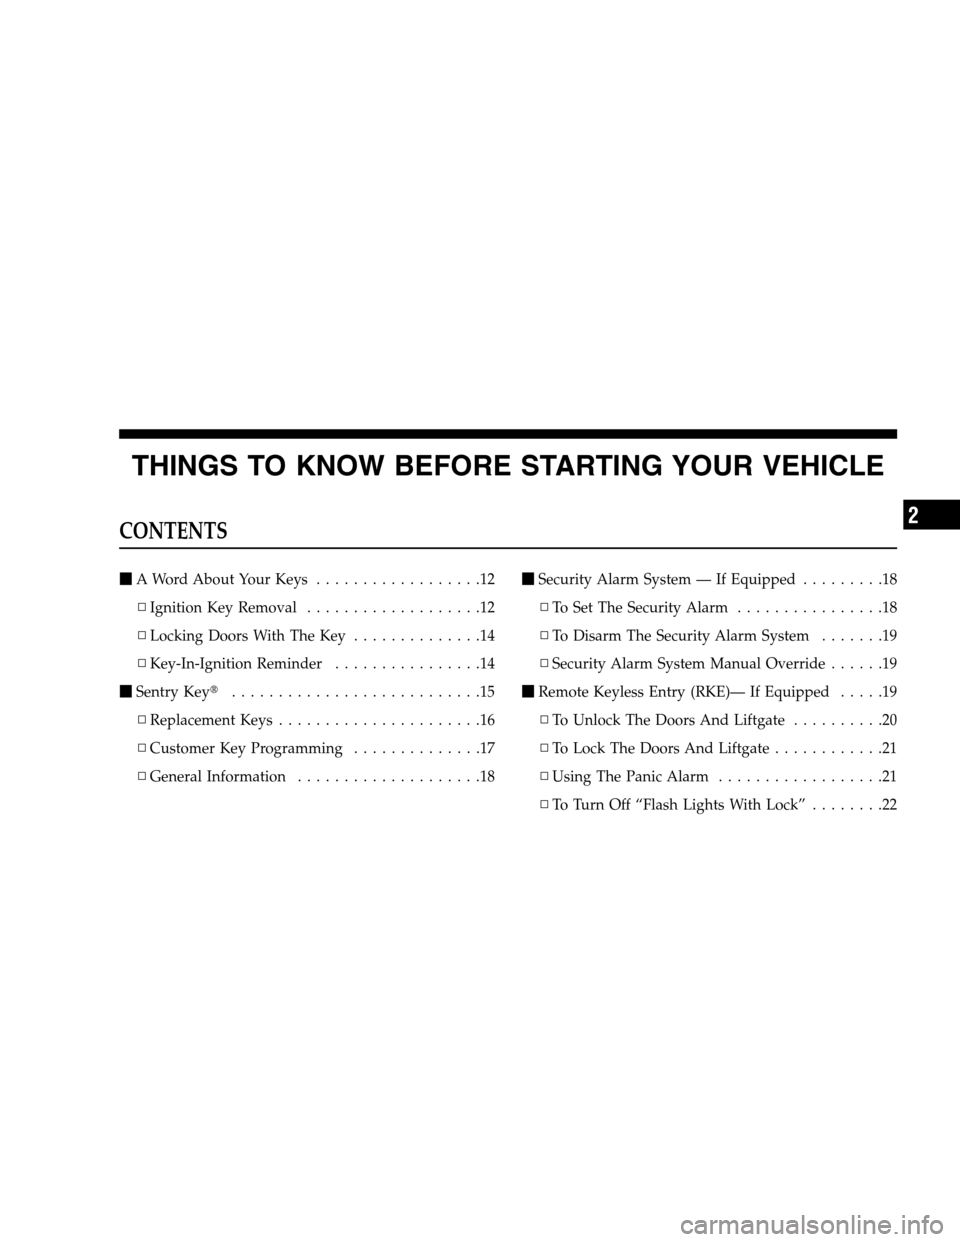 JEEP PATRIOT 2008 1.G User Guide THINGS TO KNOW BEFORE STARTING YOUR VEHICLE
CONTENTS
A Word About Your Keys..................12
▫Ignition Key Removal...................12
▫Locking Doors With The Key..............14
▫Key-In-Ig